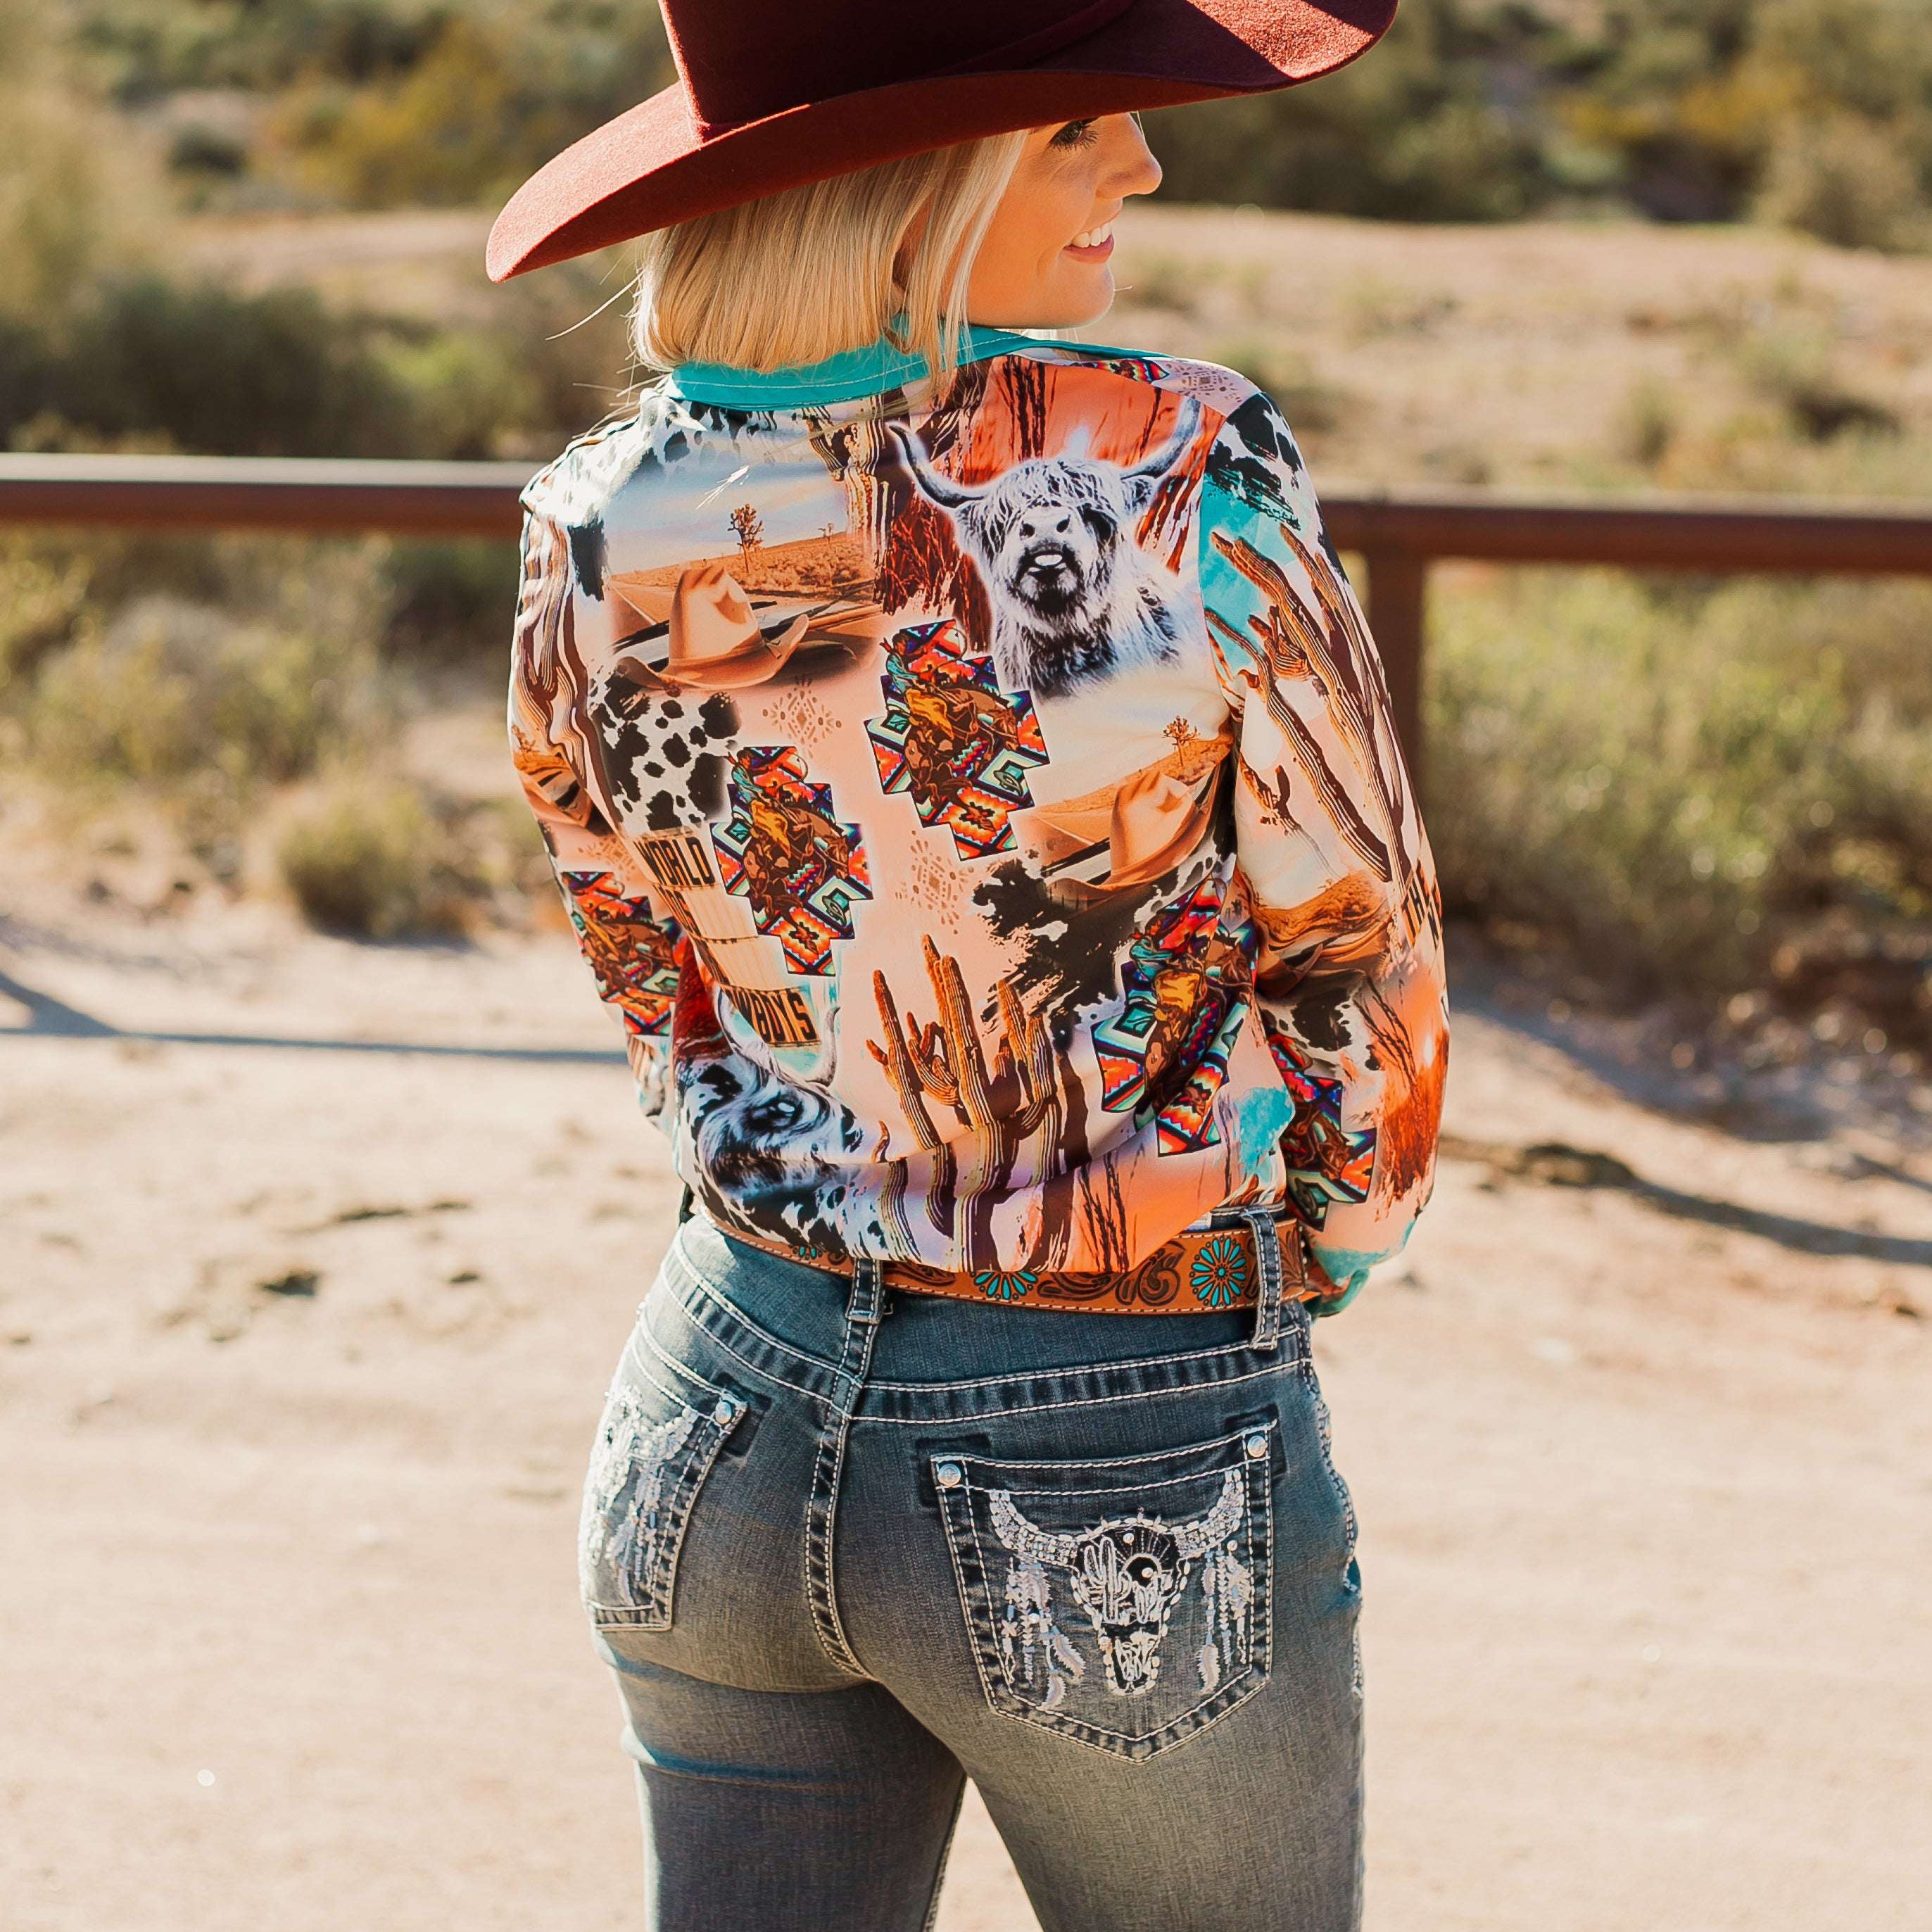 Desert Sky Bootcut Jeans by Grace In LA - The Glamorous Cowgirl